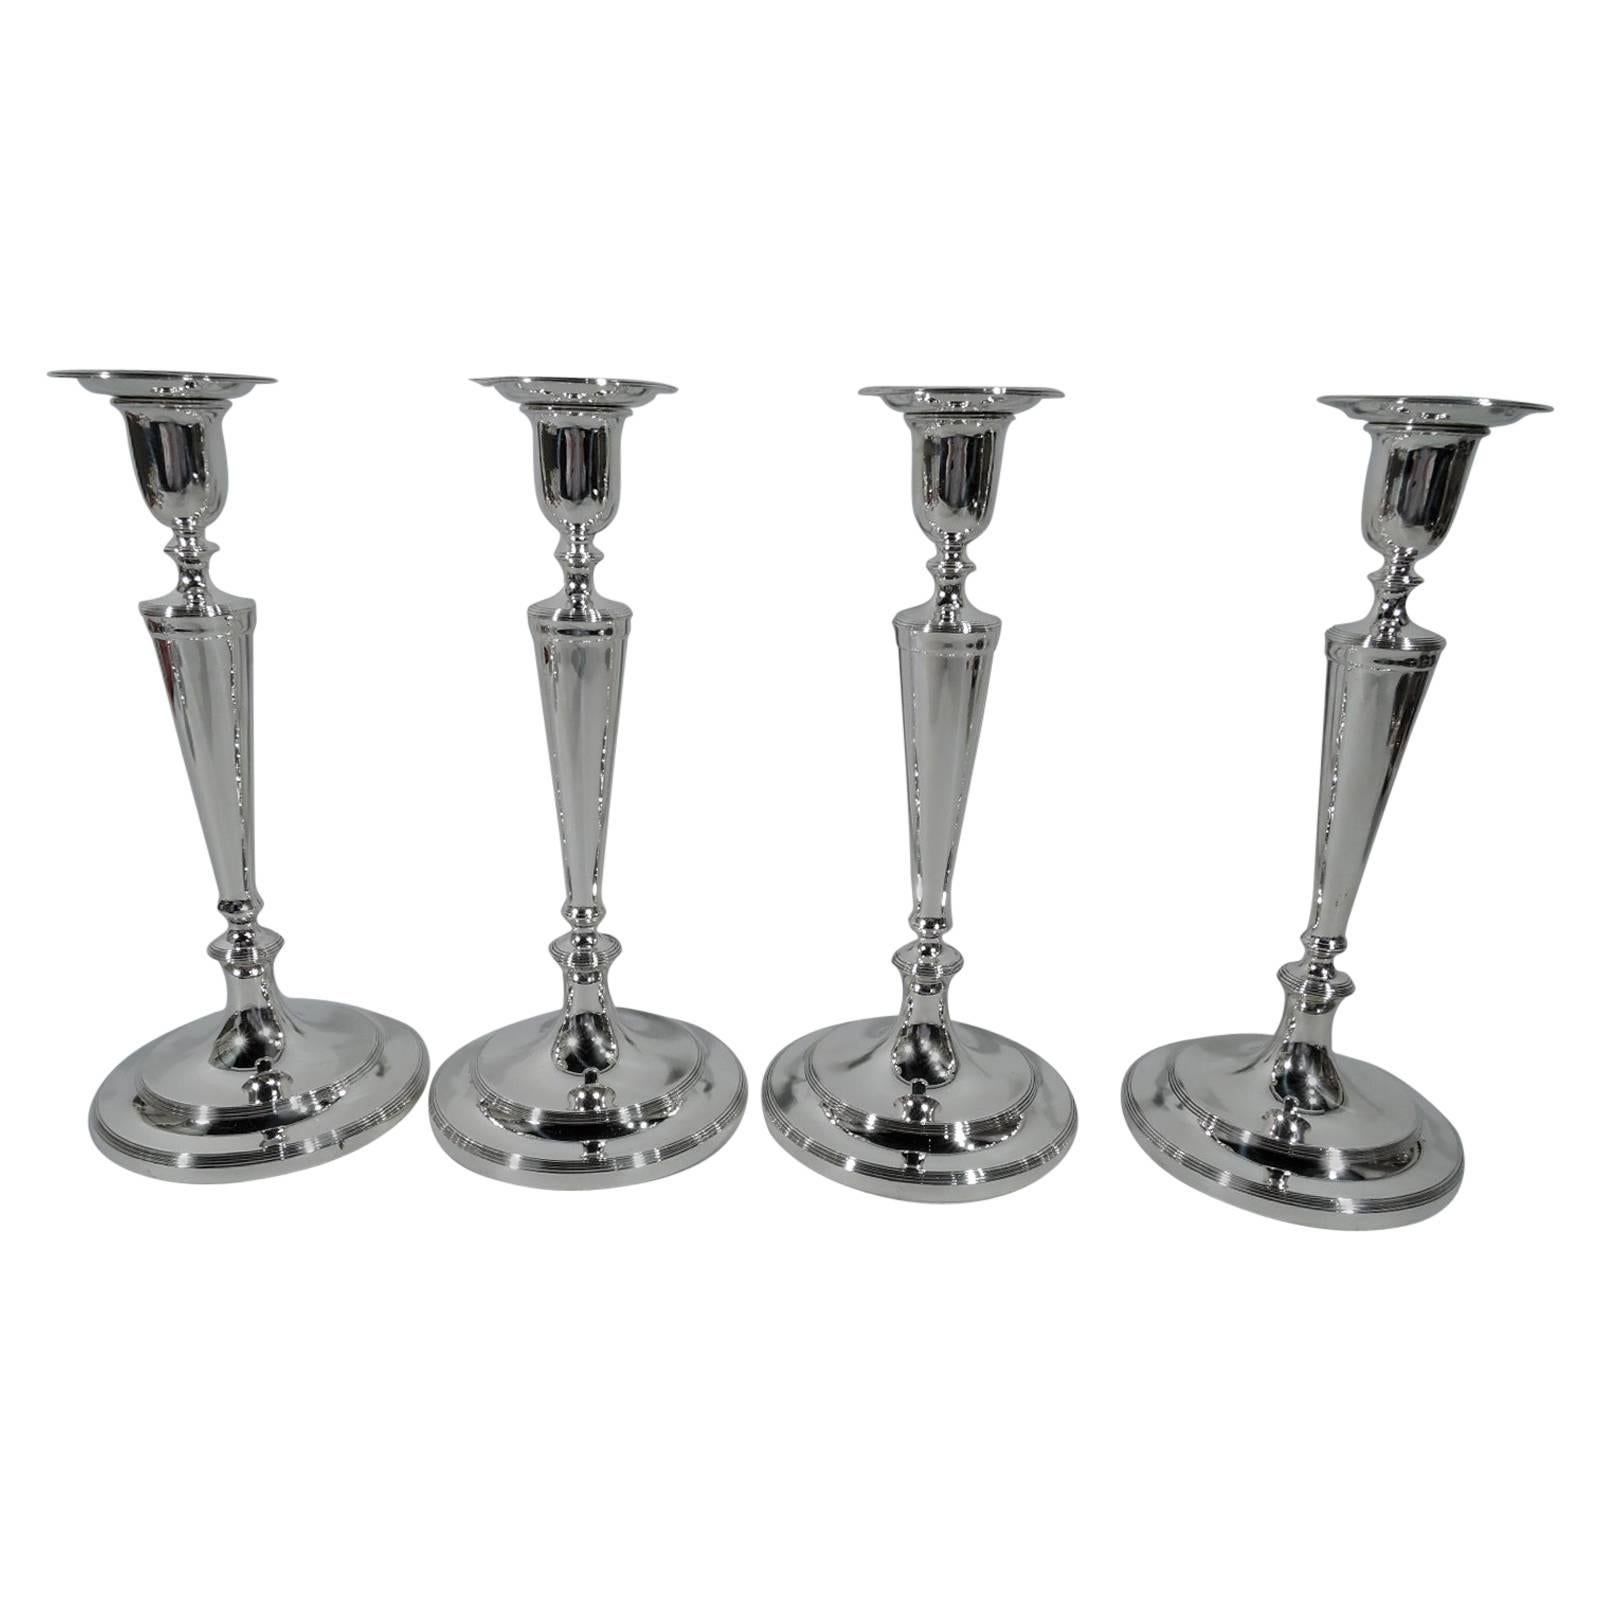 Set of Four Antique Tiffany Classical Sterling Silver Candlesticks